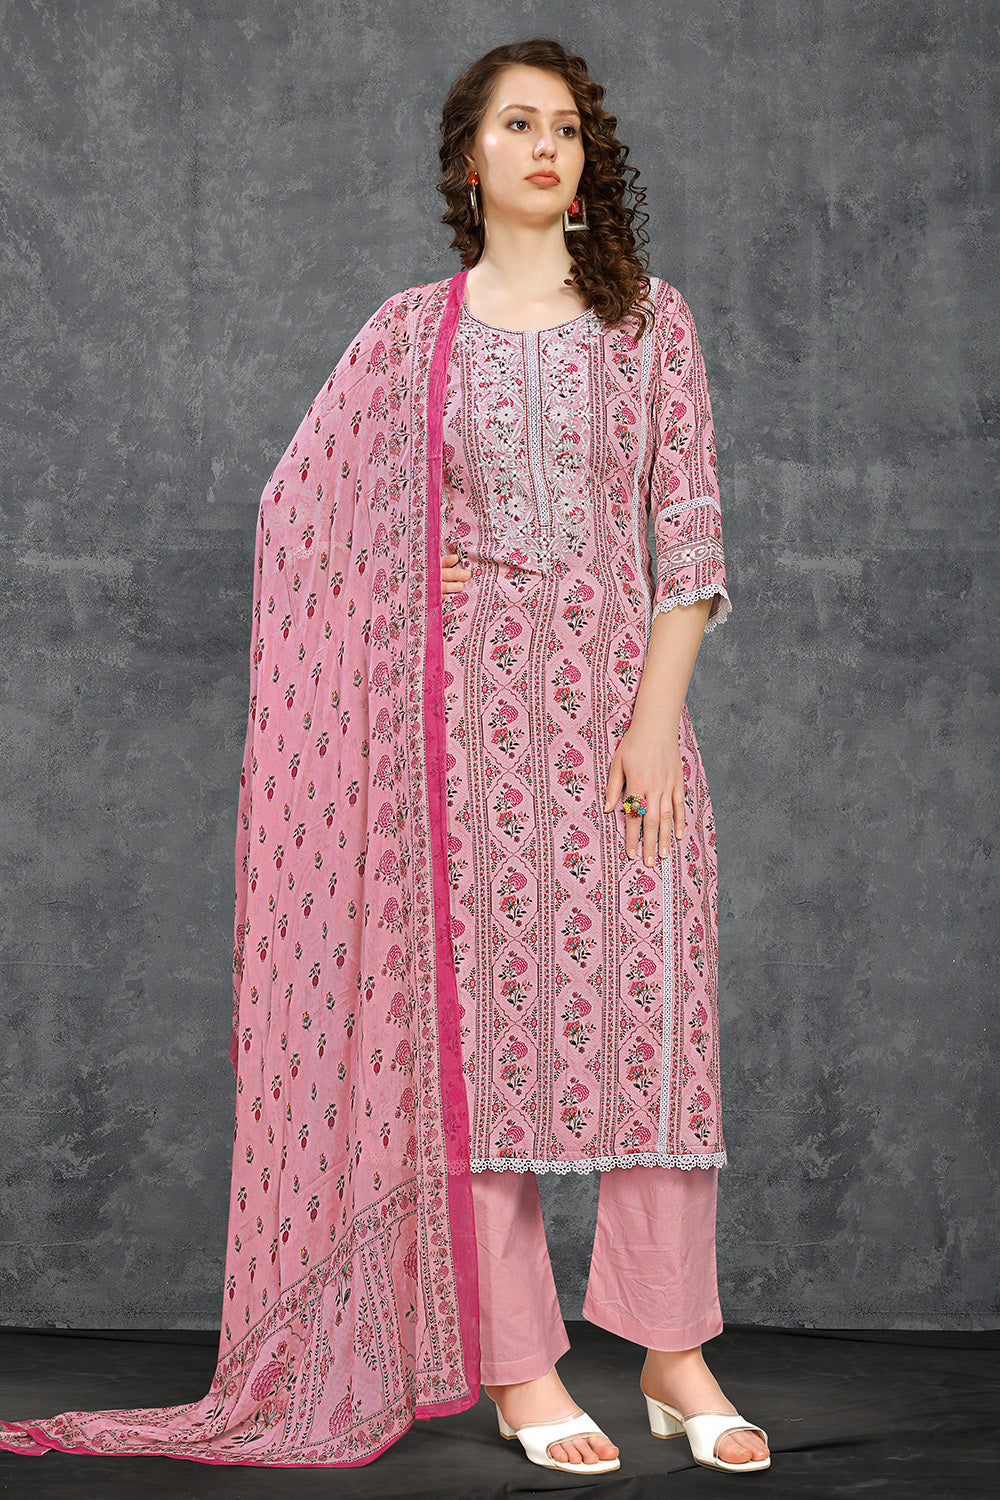 Rose Pink Color Floral Printed Cotton Unstitched Material